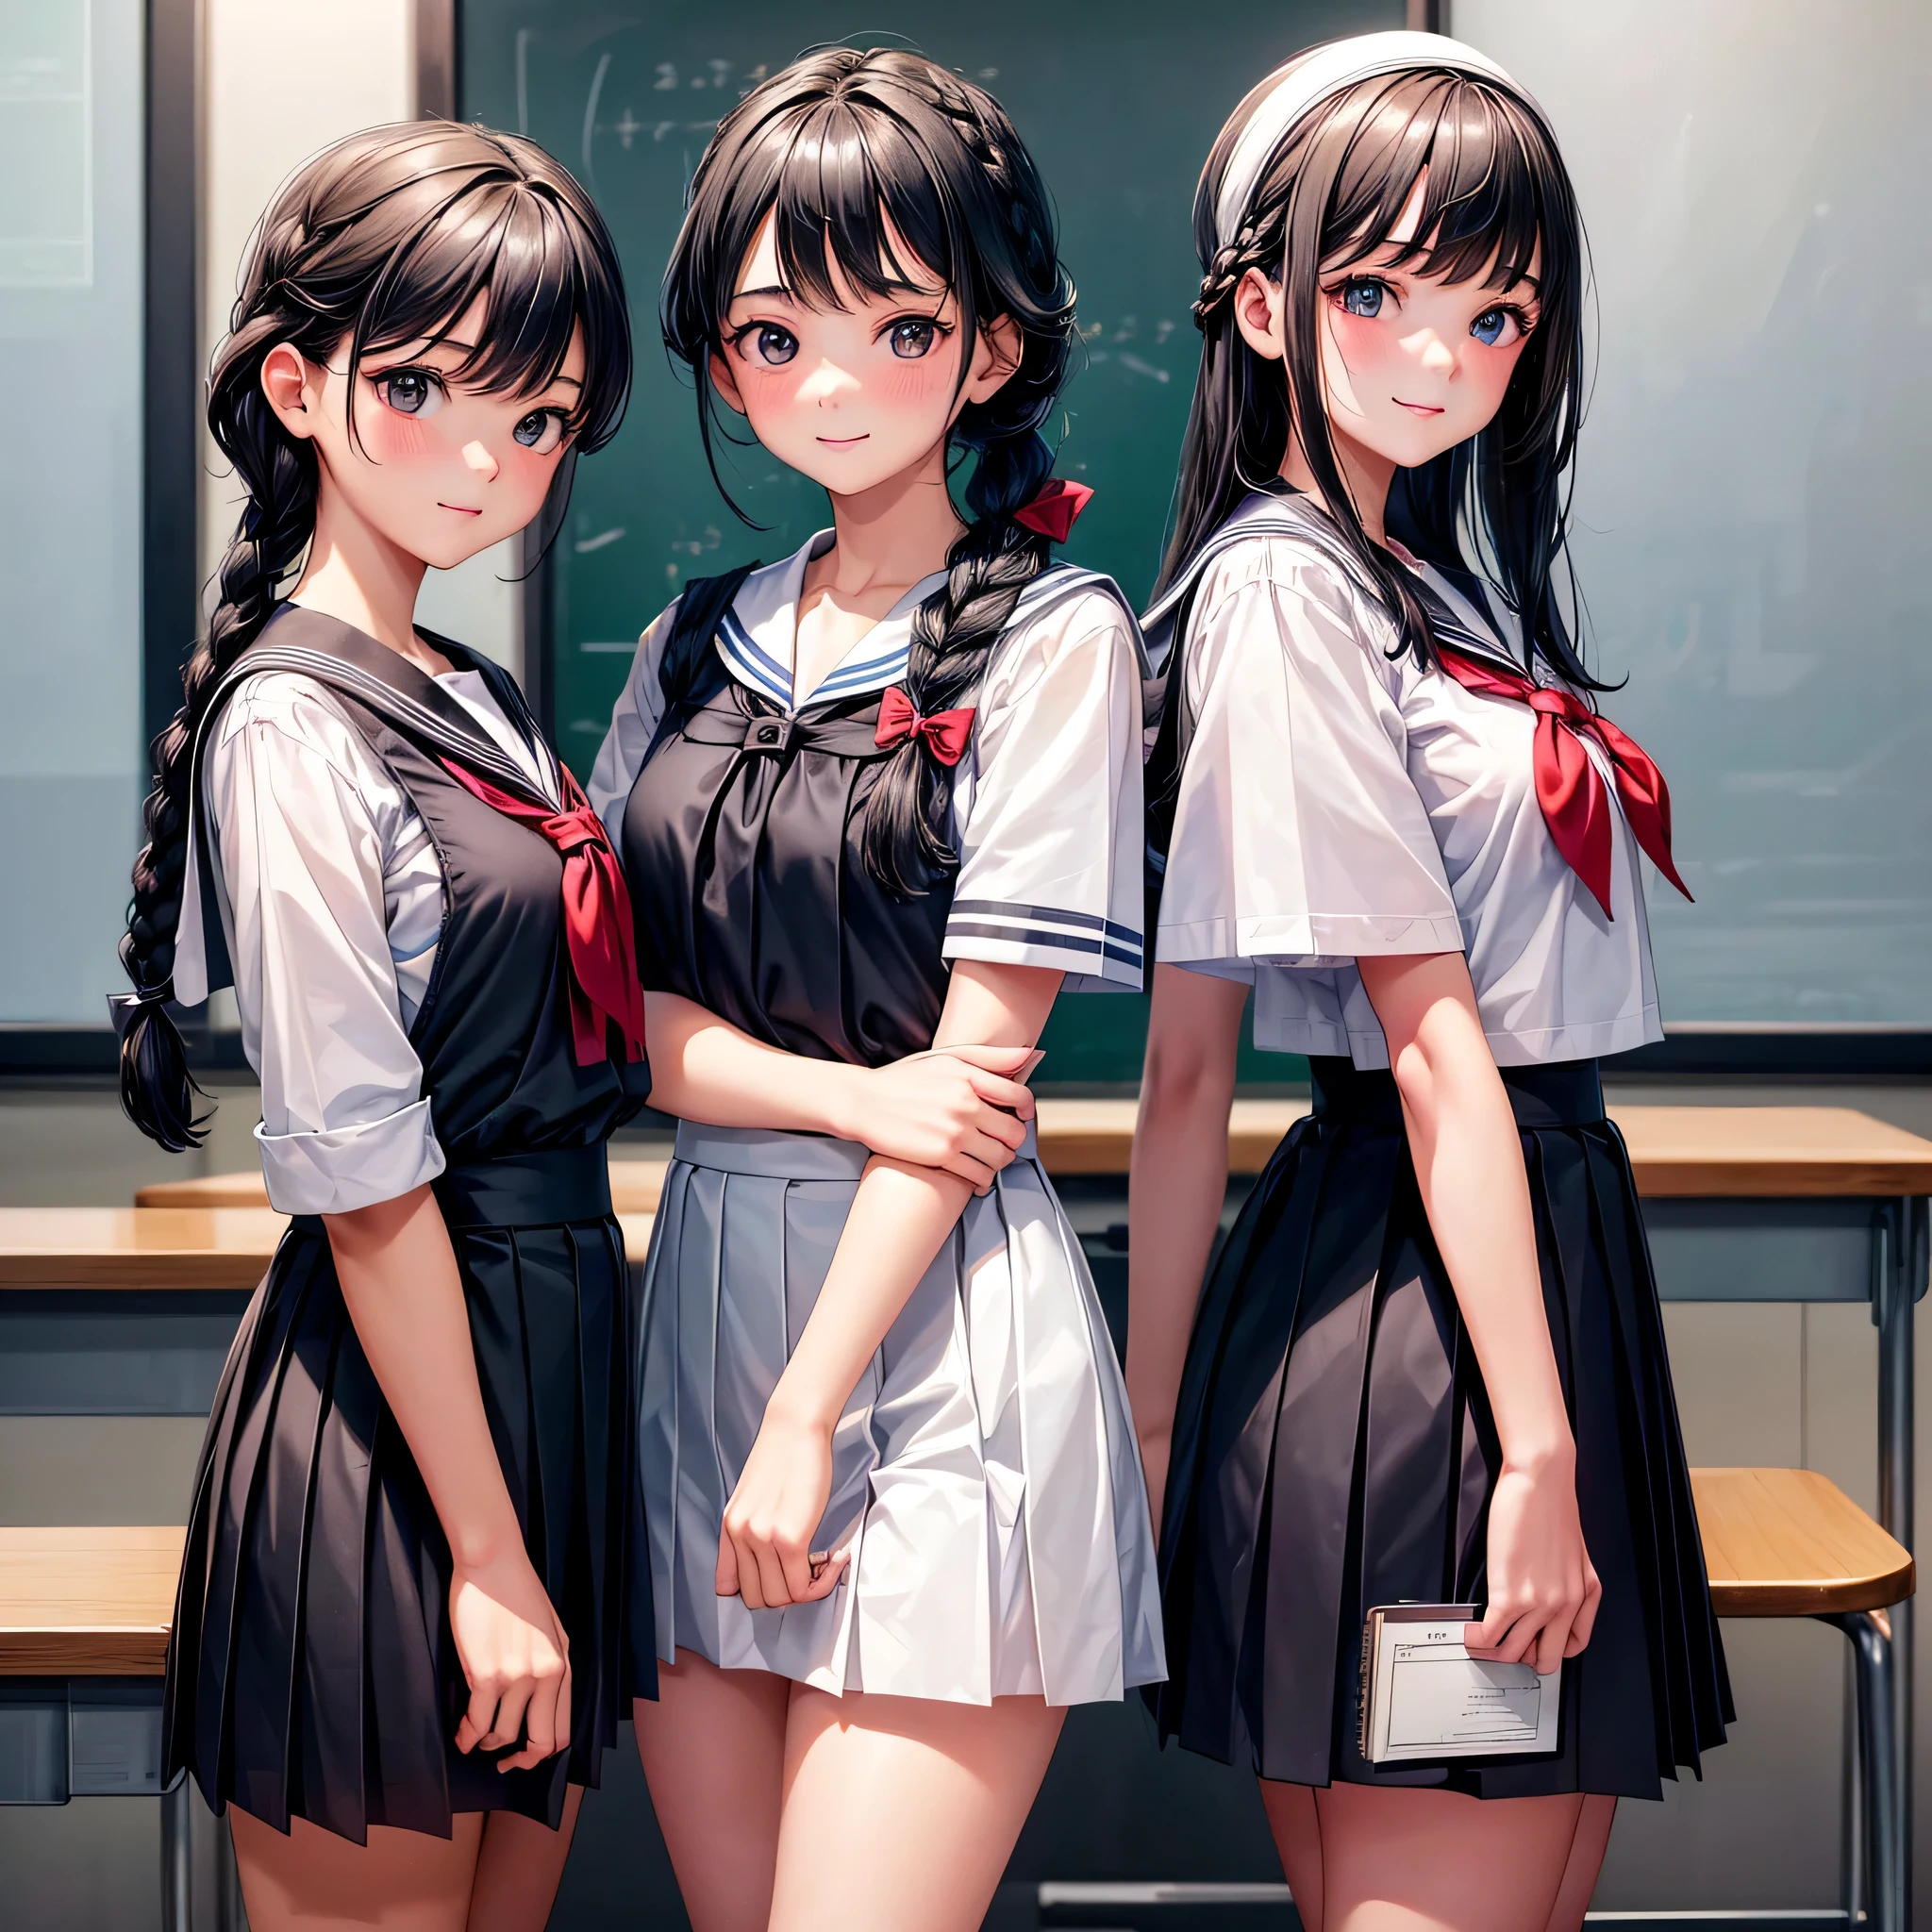 upper body (3 girls, cute triplet:1.3 girls, Braid black hair) ((15 yo)) (in a summer school Sailor suit, skirt), best smile, in the school class room,  break, perfect anatomy, masterpiece:1.2, best quality, 8k, beautiful detailed grow, daydreaming expression,